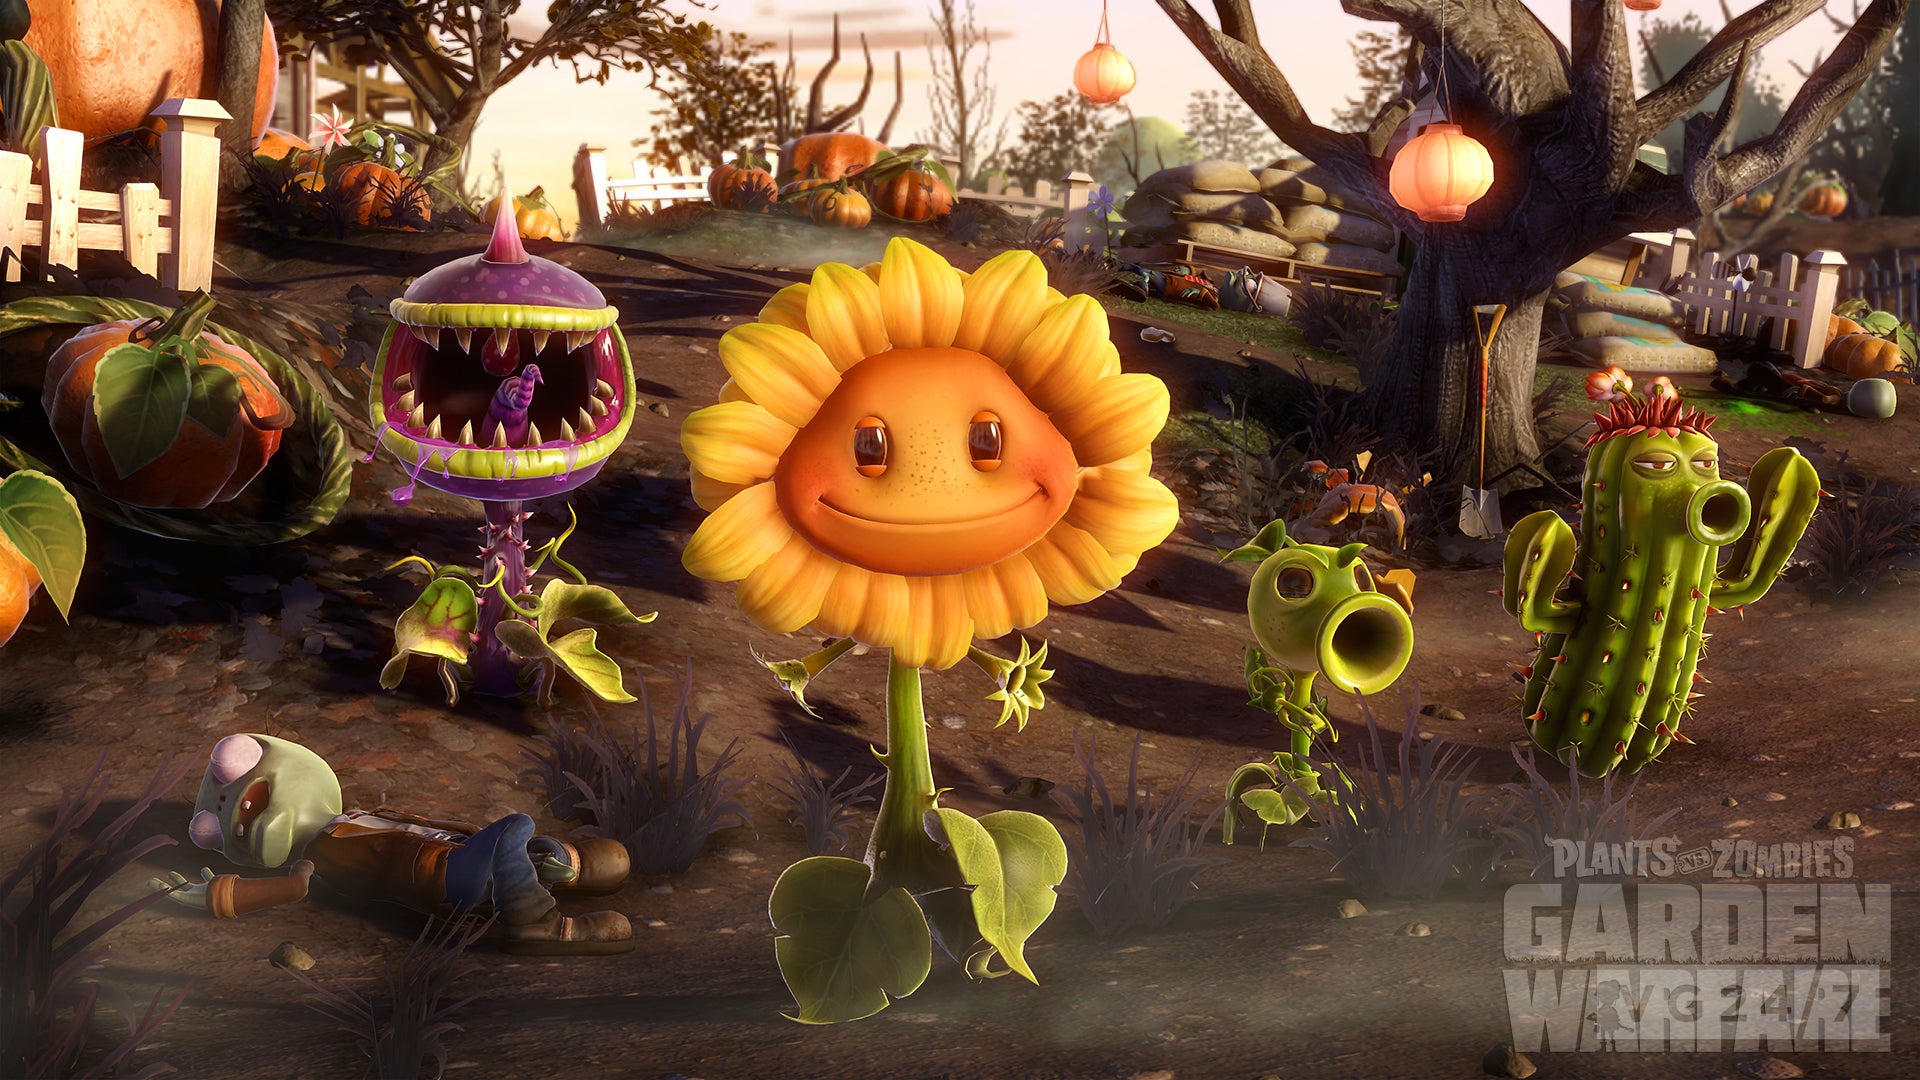 Image for Billie Eilish’s Bad Guy is “literally Plants vs. Zombies” - duh!